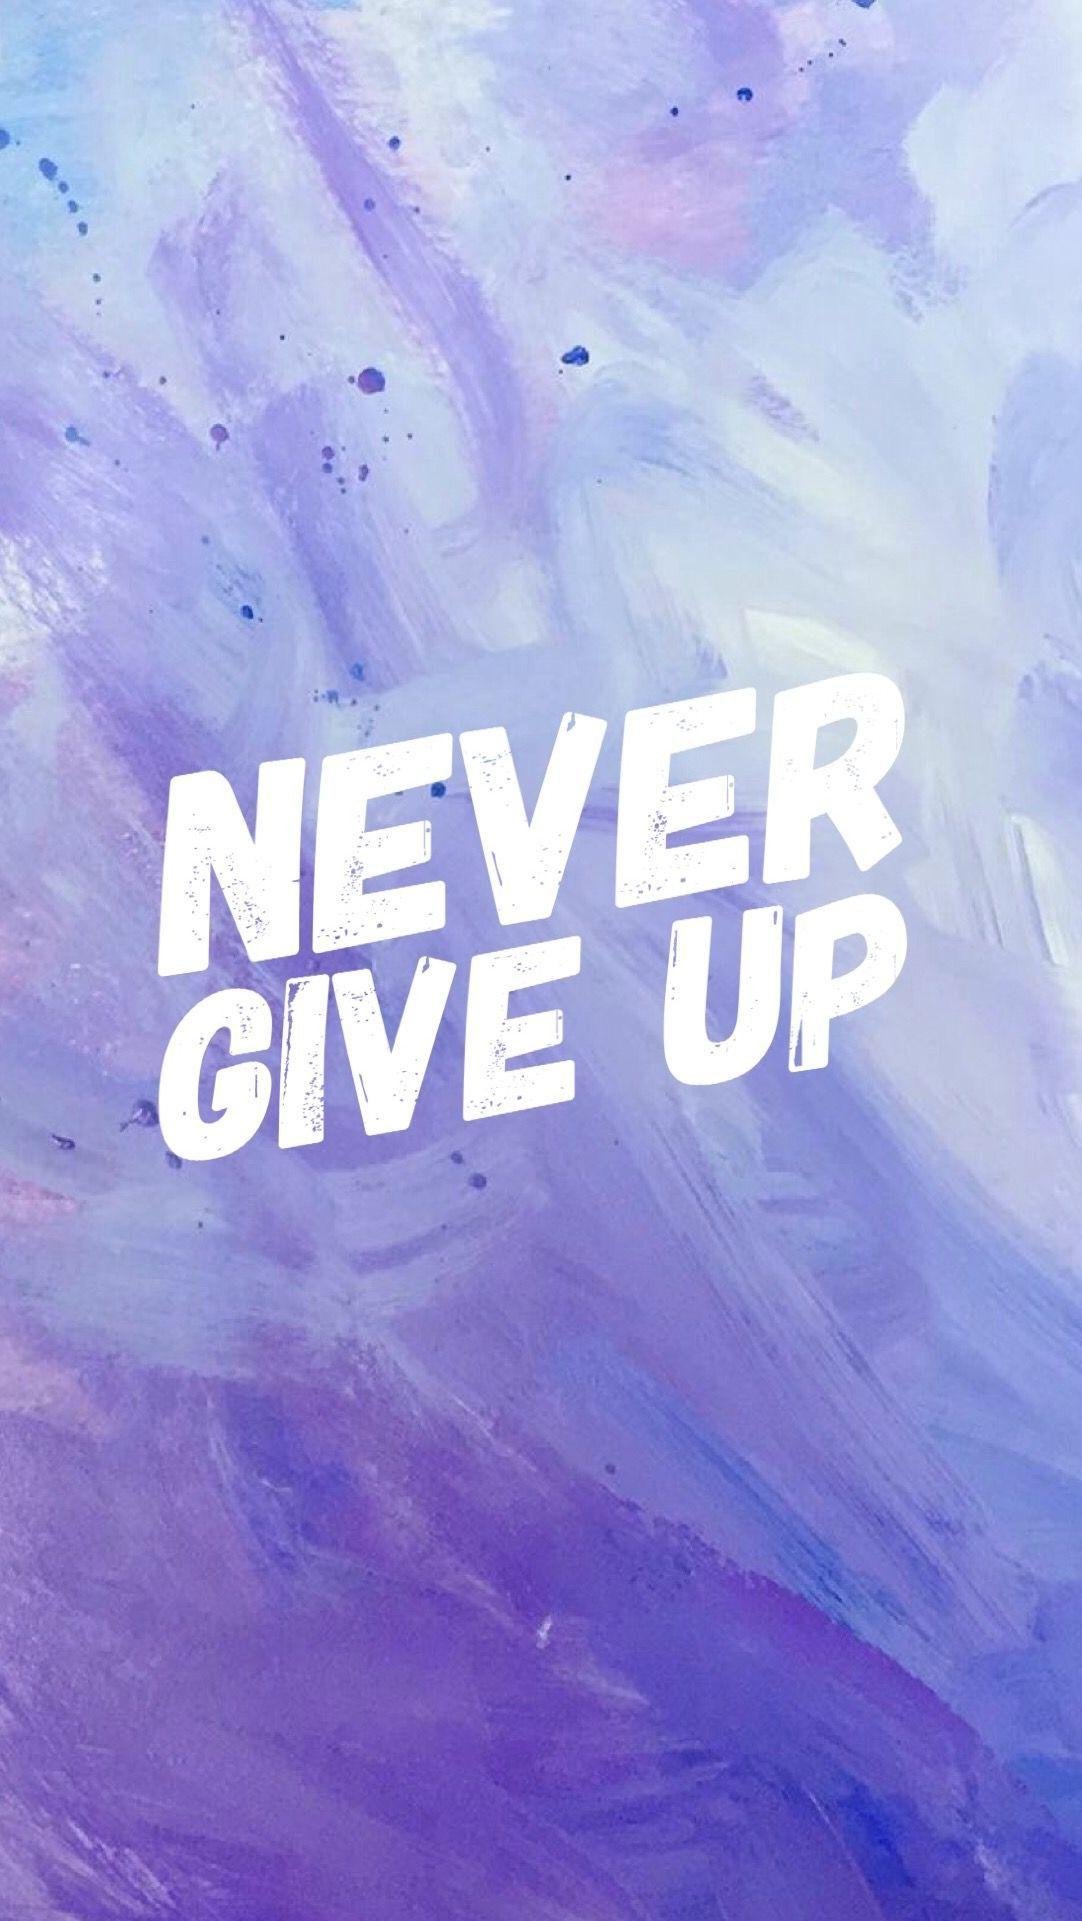 Never Give UP Motivational Facebook Cover Photo  QuotationWalls